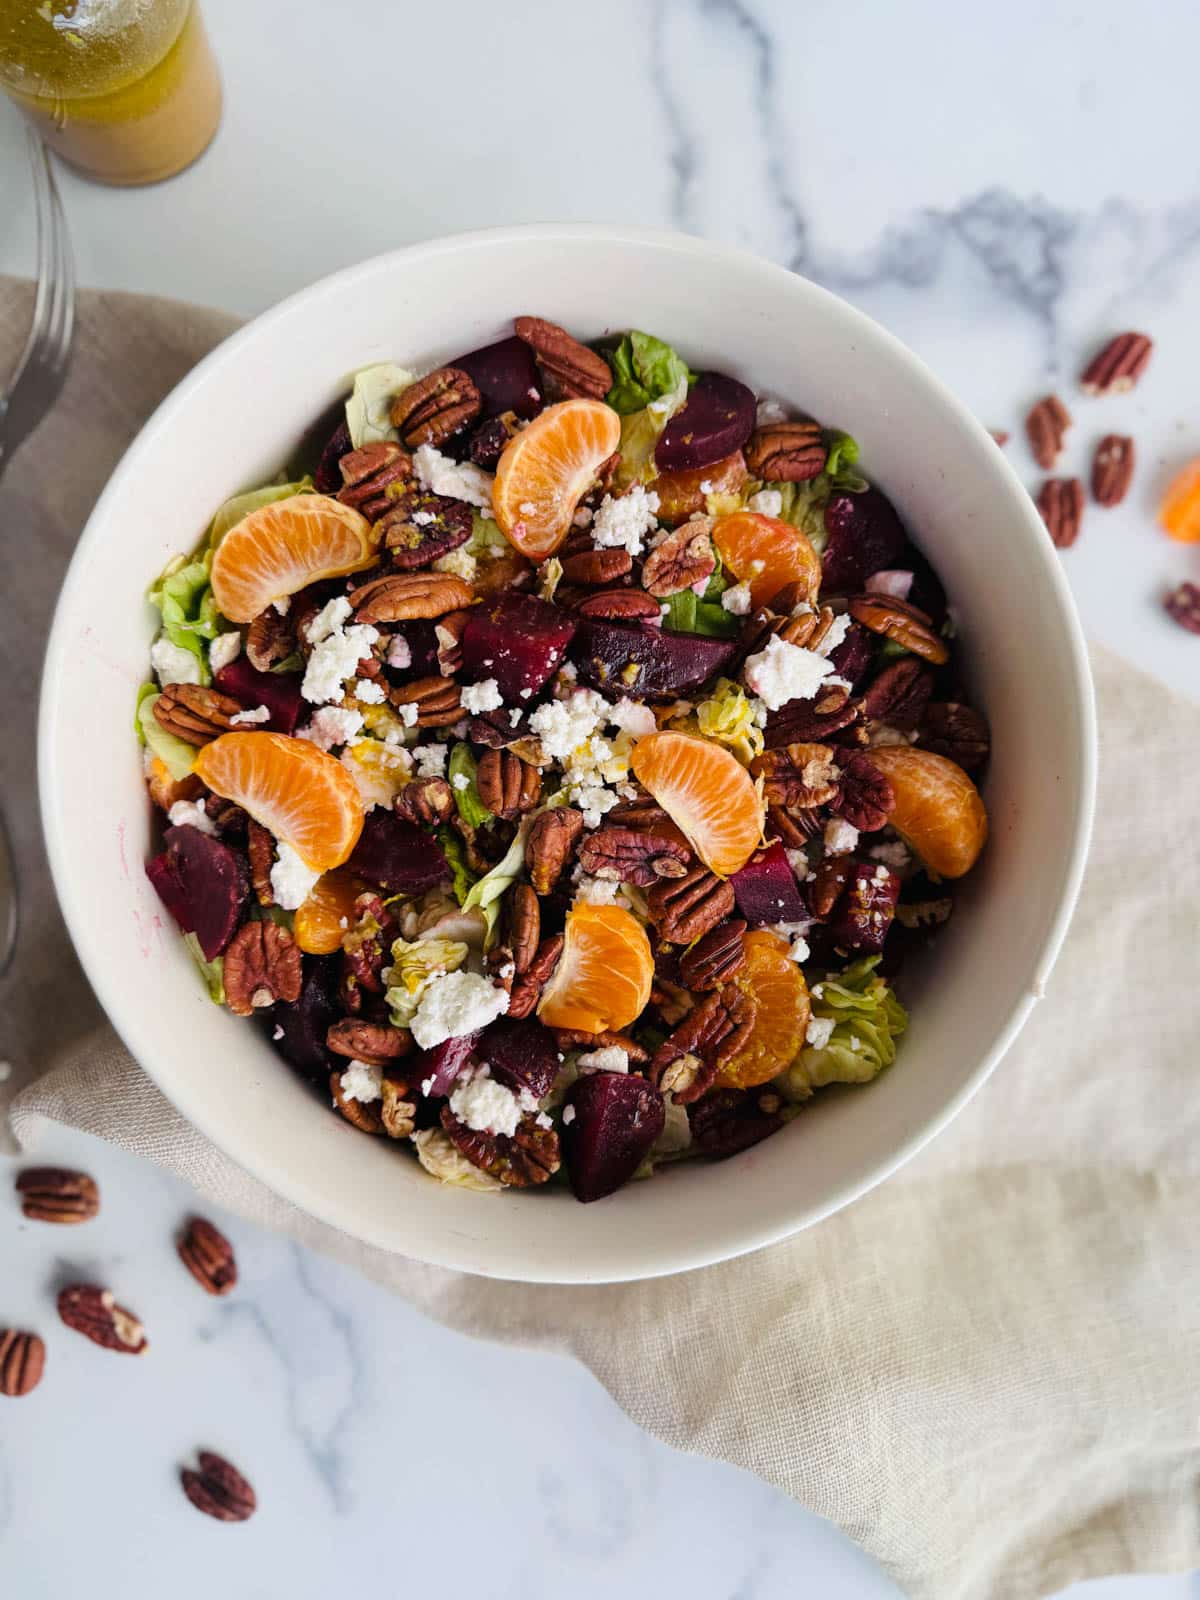 Beet, lettuce, orange sections, feta, and pecans in a white bowl on a white marble counter.